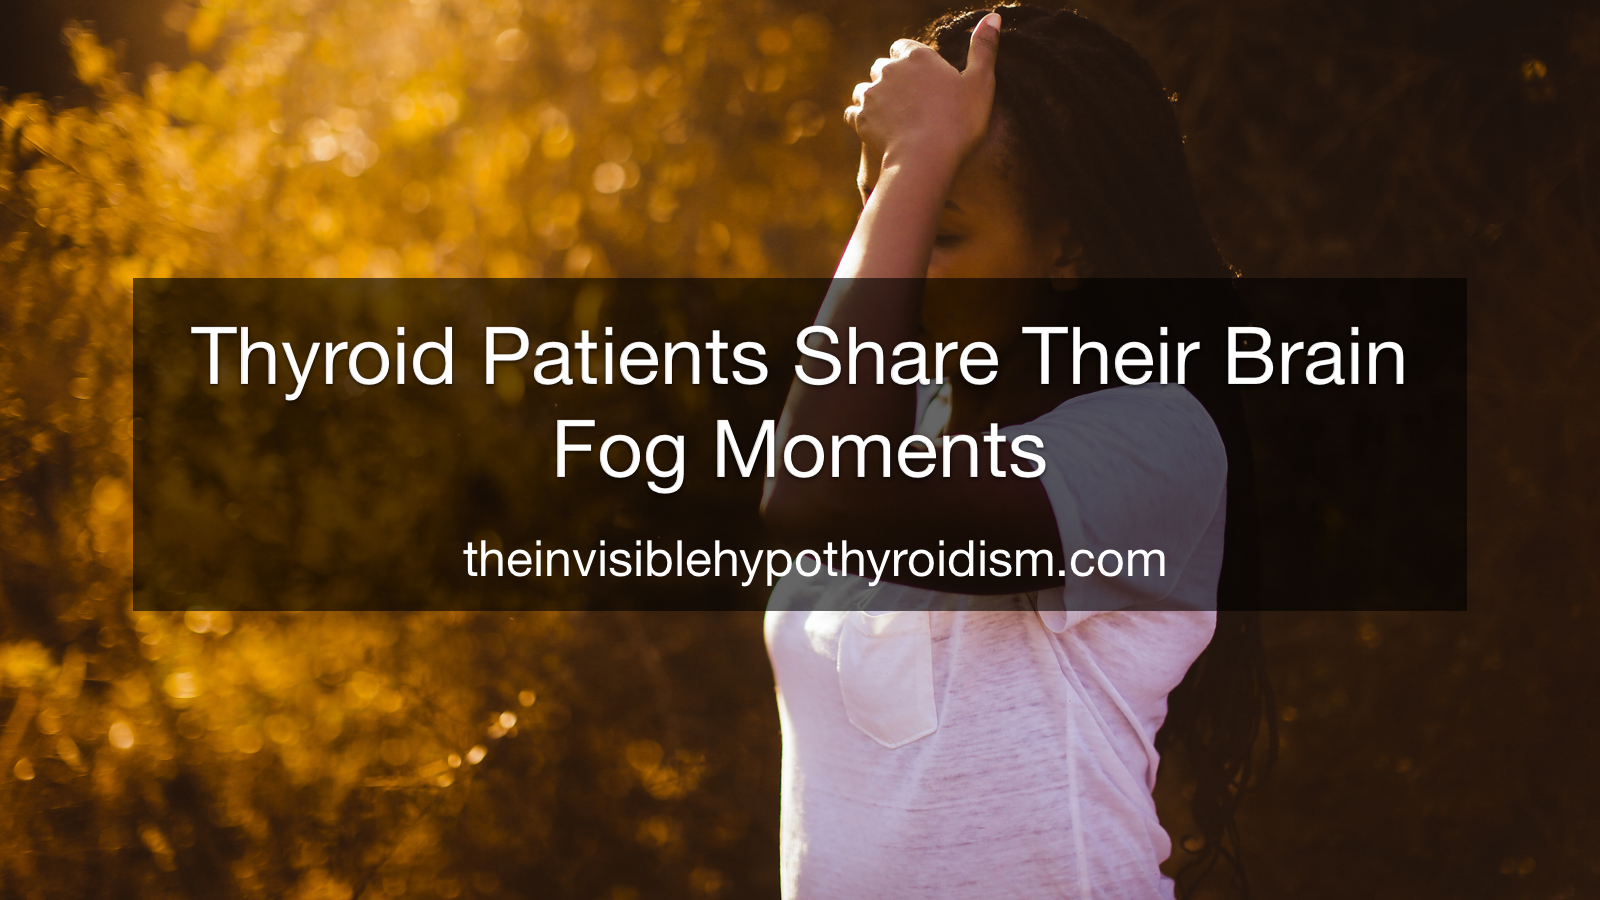 Thyroid Patients Share Their Brain Fog Moments